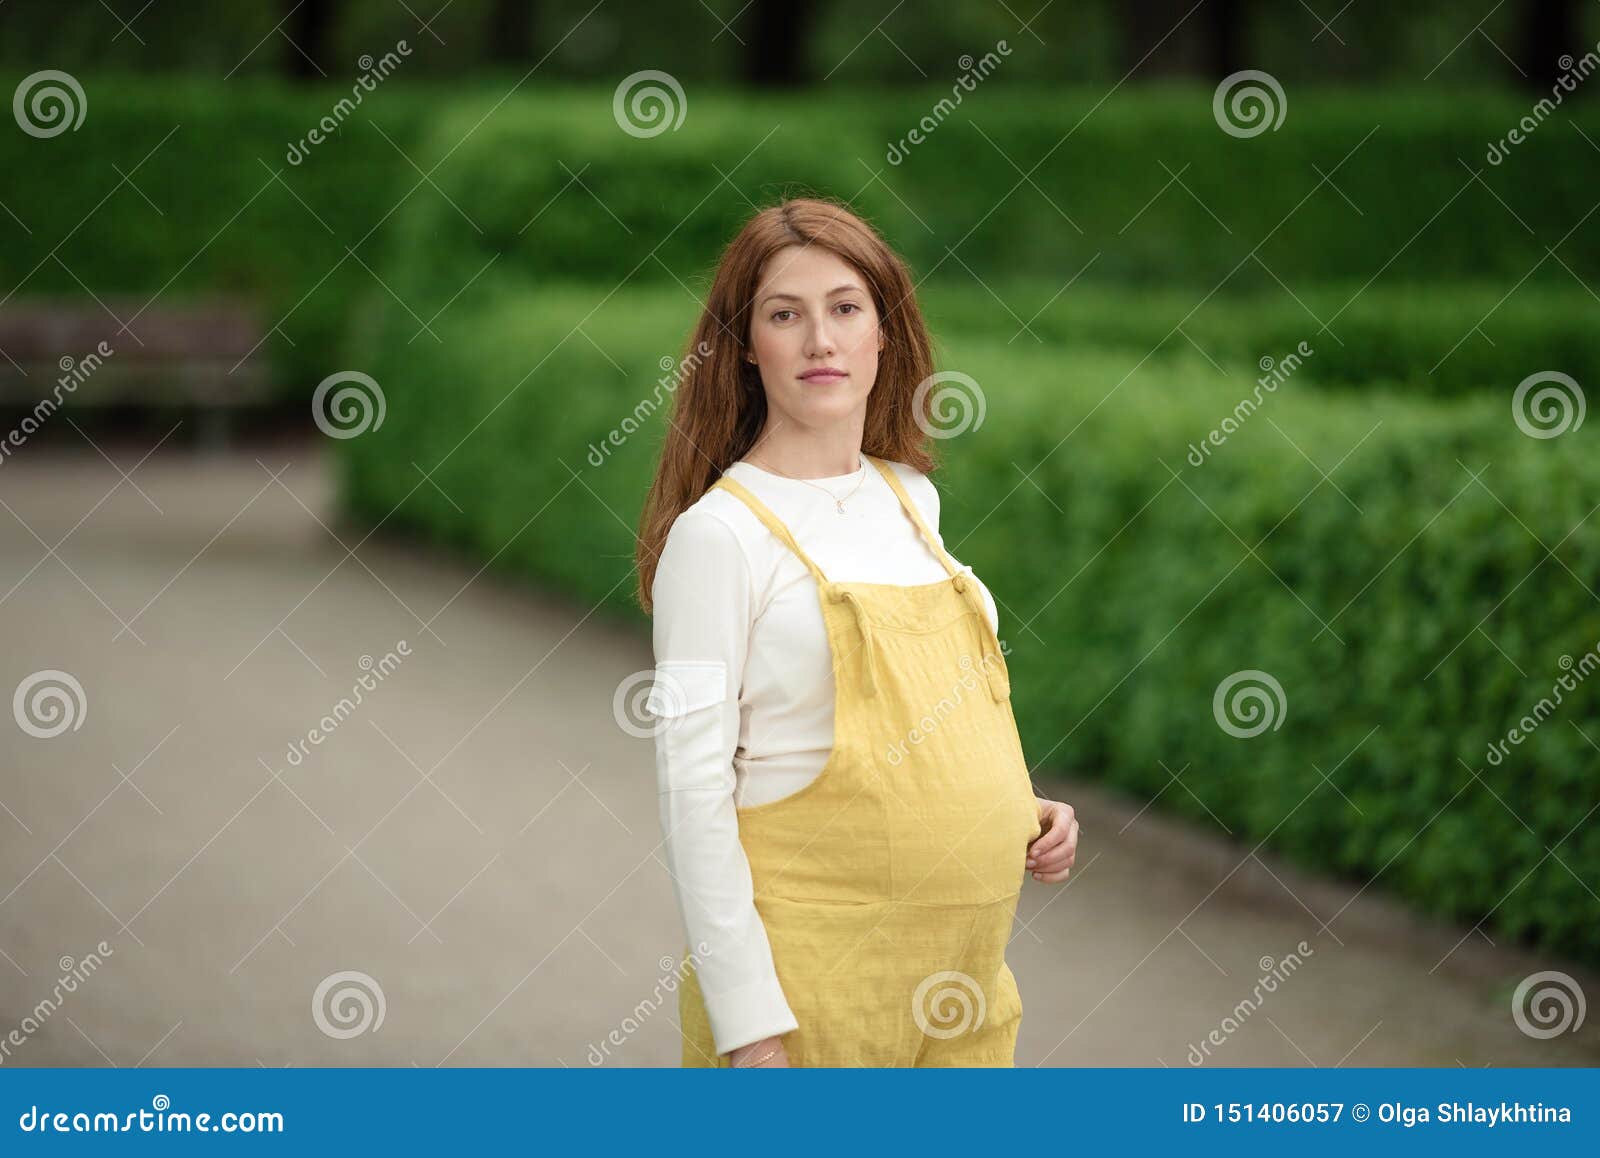 Beautiful Pregnant Girl Walking In The Park Stock Image Image Of Grass Nature 151406057